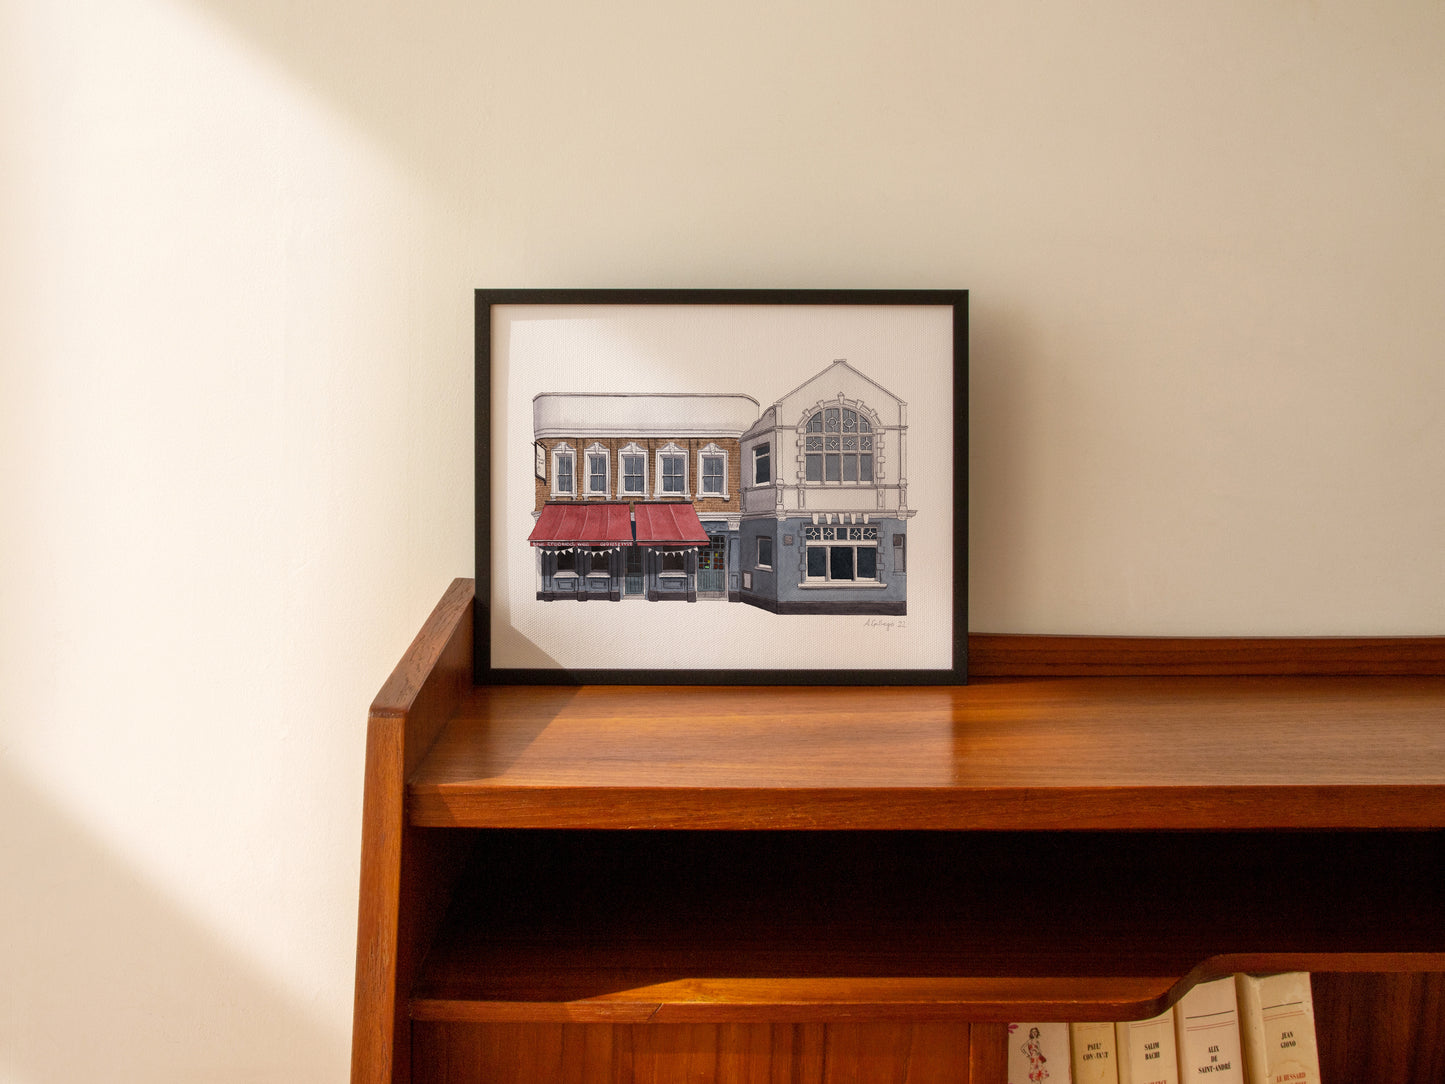 Camberwell - The Crooked Well pub - Giclée Print (unframed)